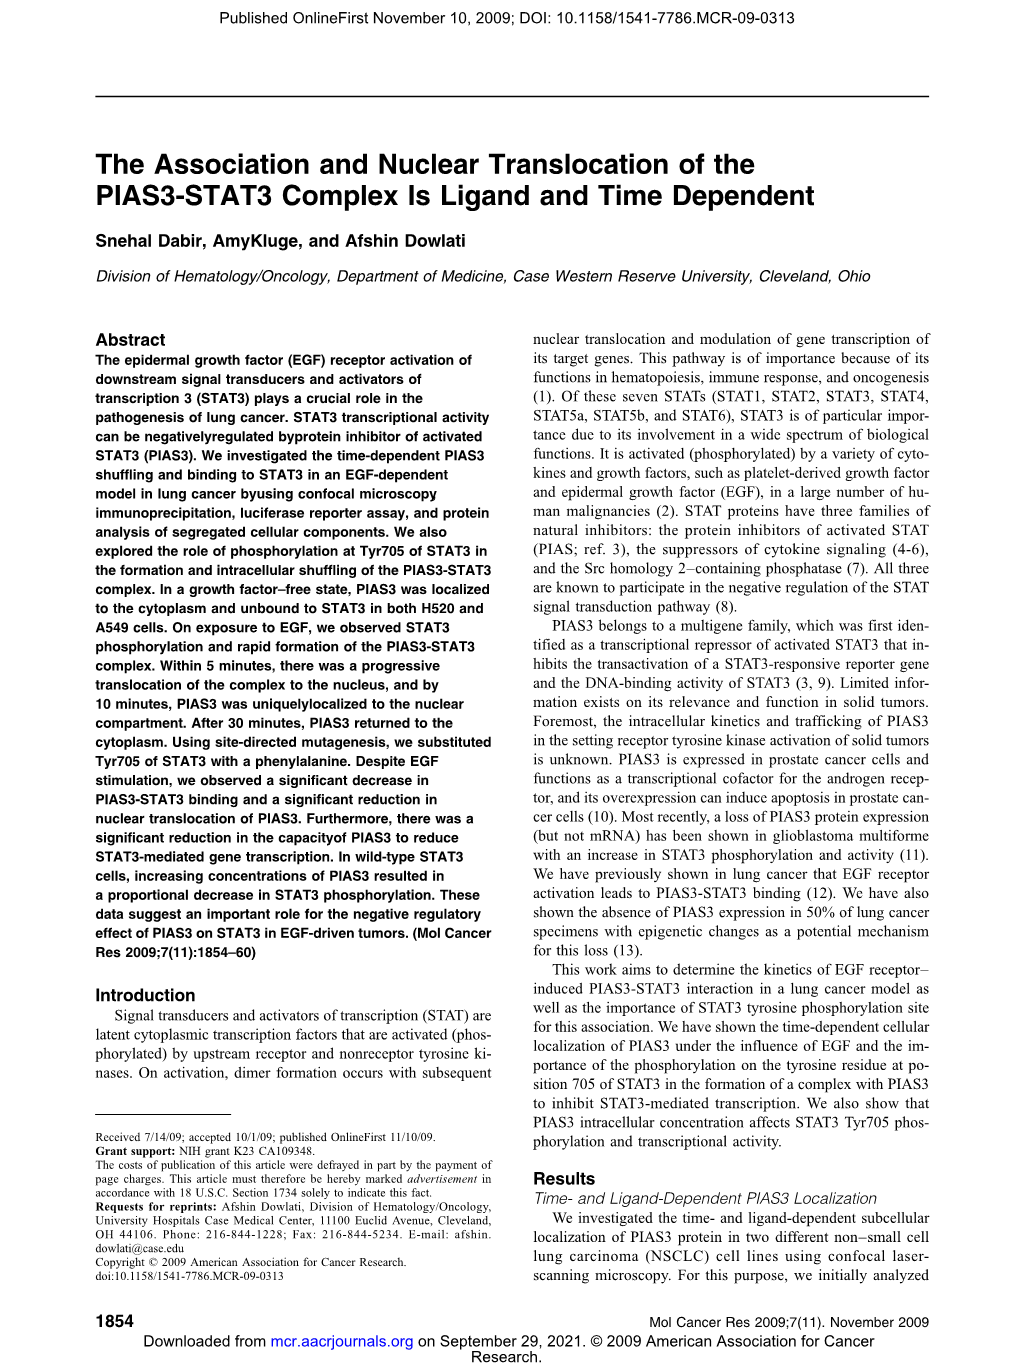 The Association and Nuclear Translocation of the PIAS3-STAT3 Complex Is Ligand and Time Dependent